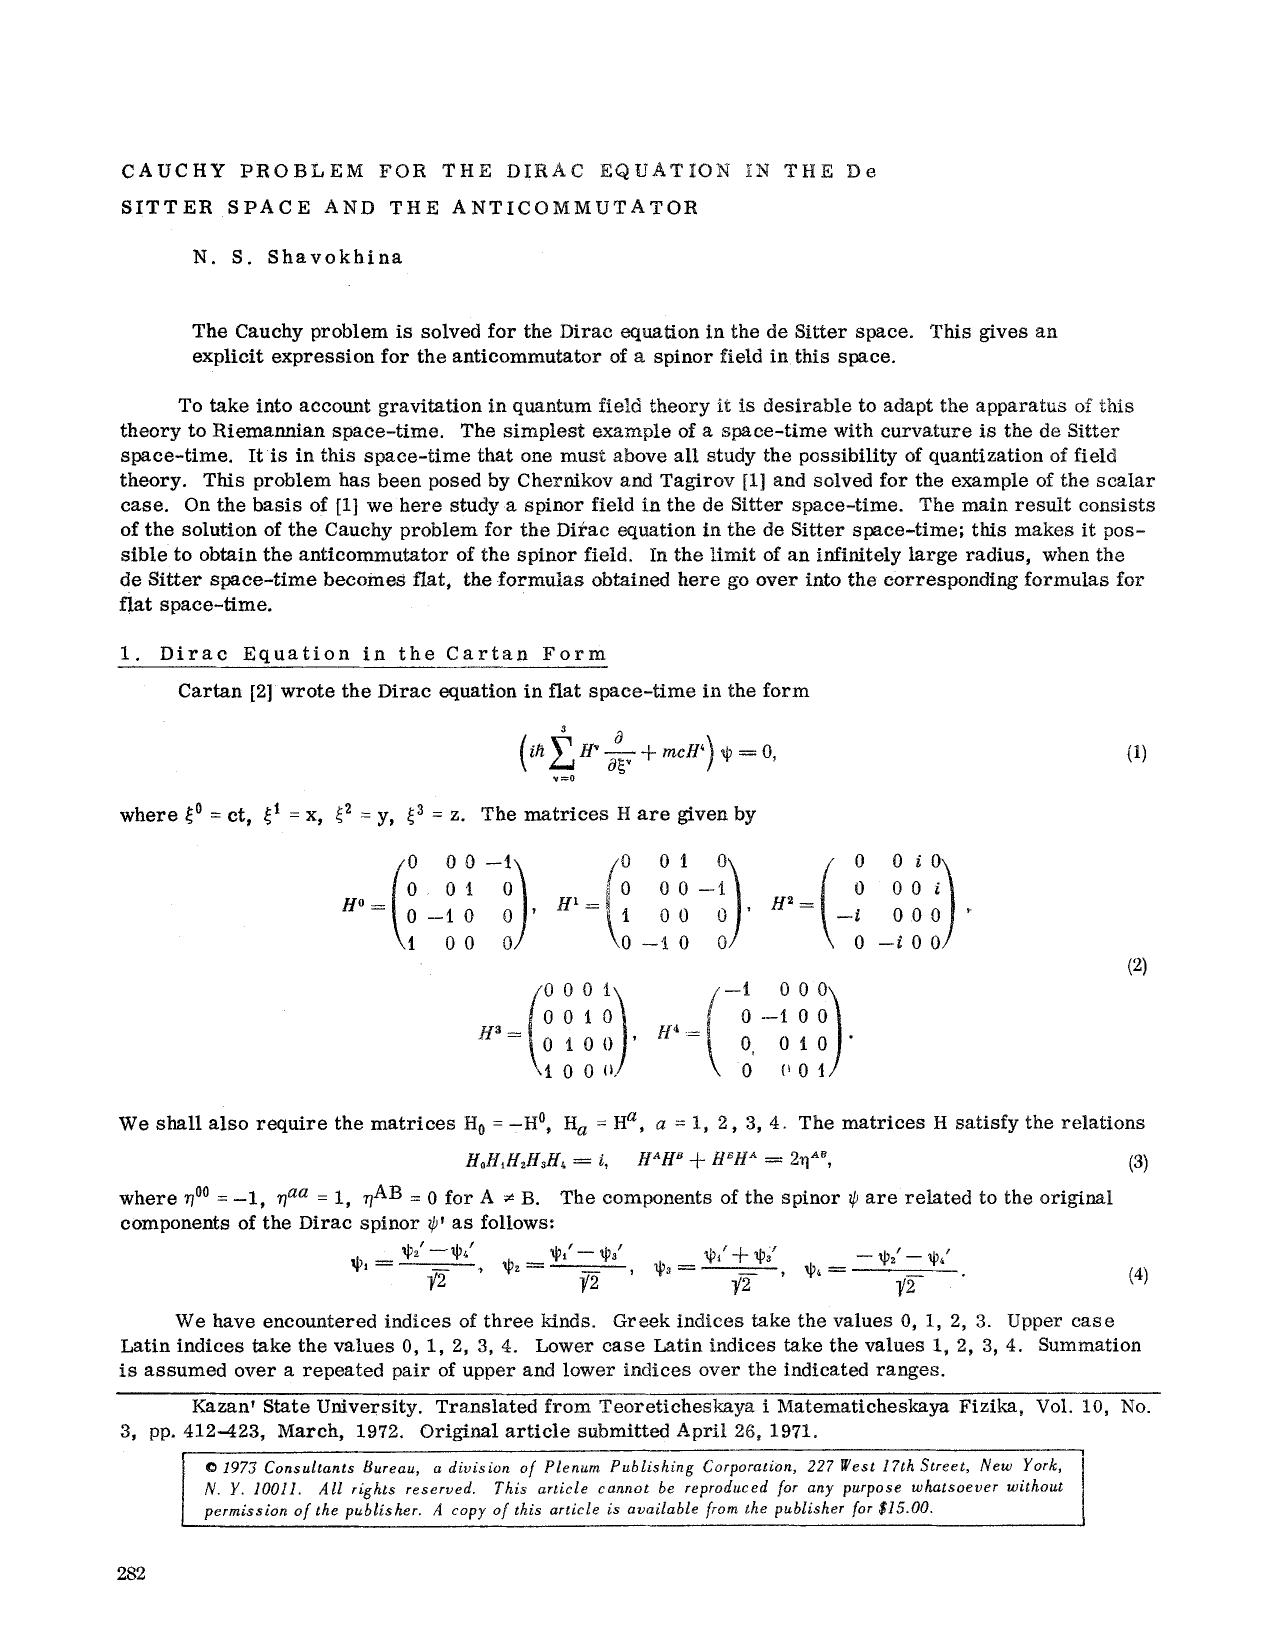 Cauchy problem for the Dirac equation in the de Sitter space and the anticommutator by Unknown